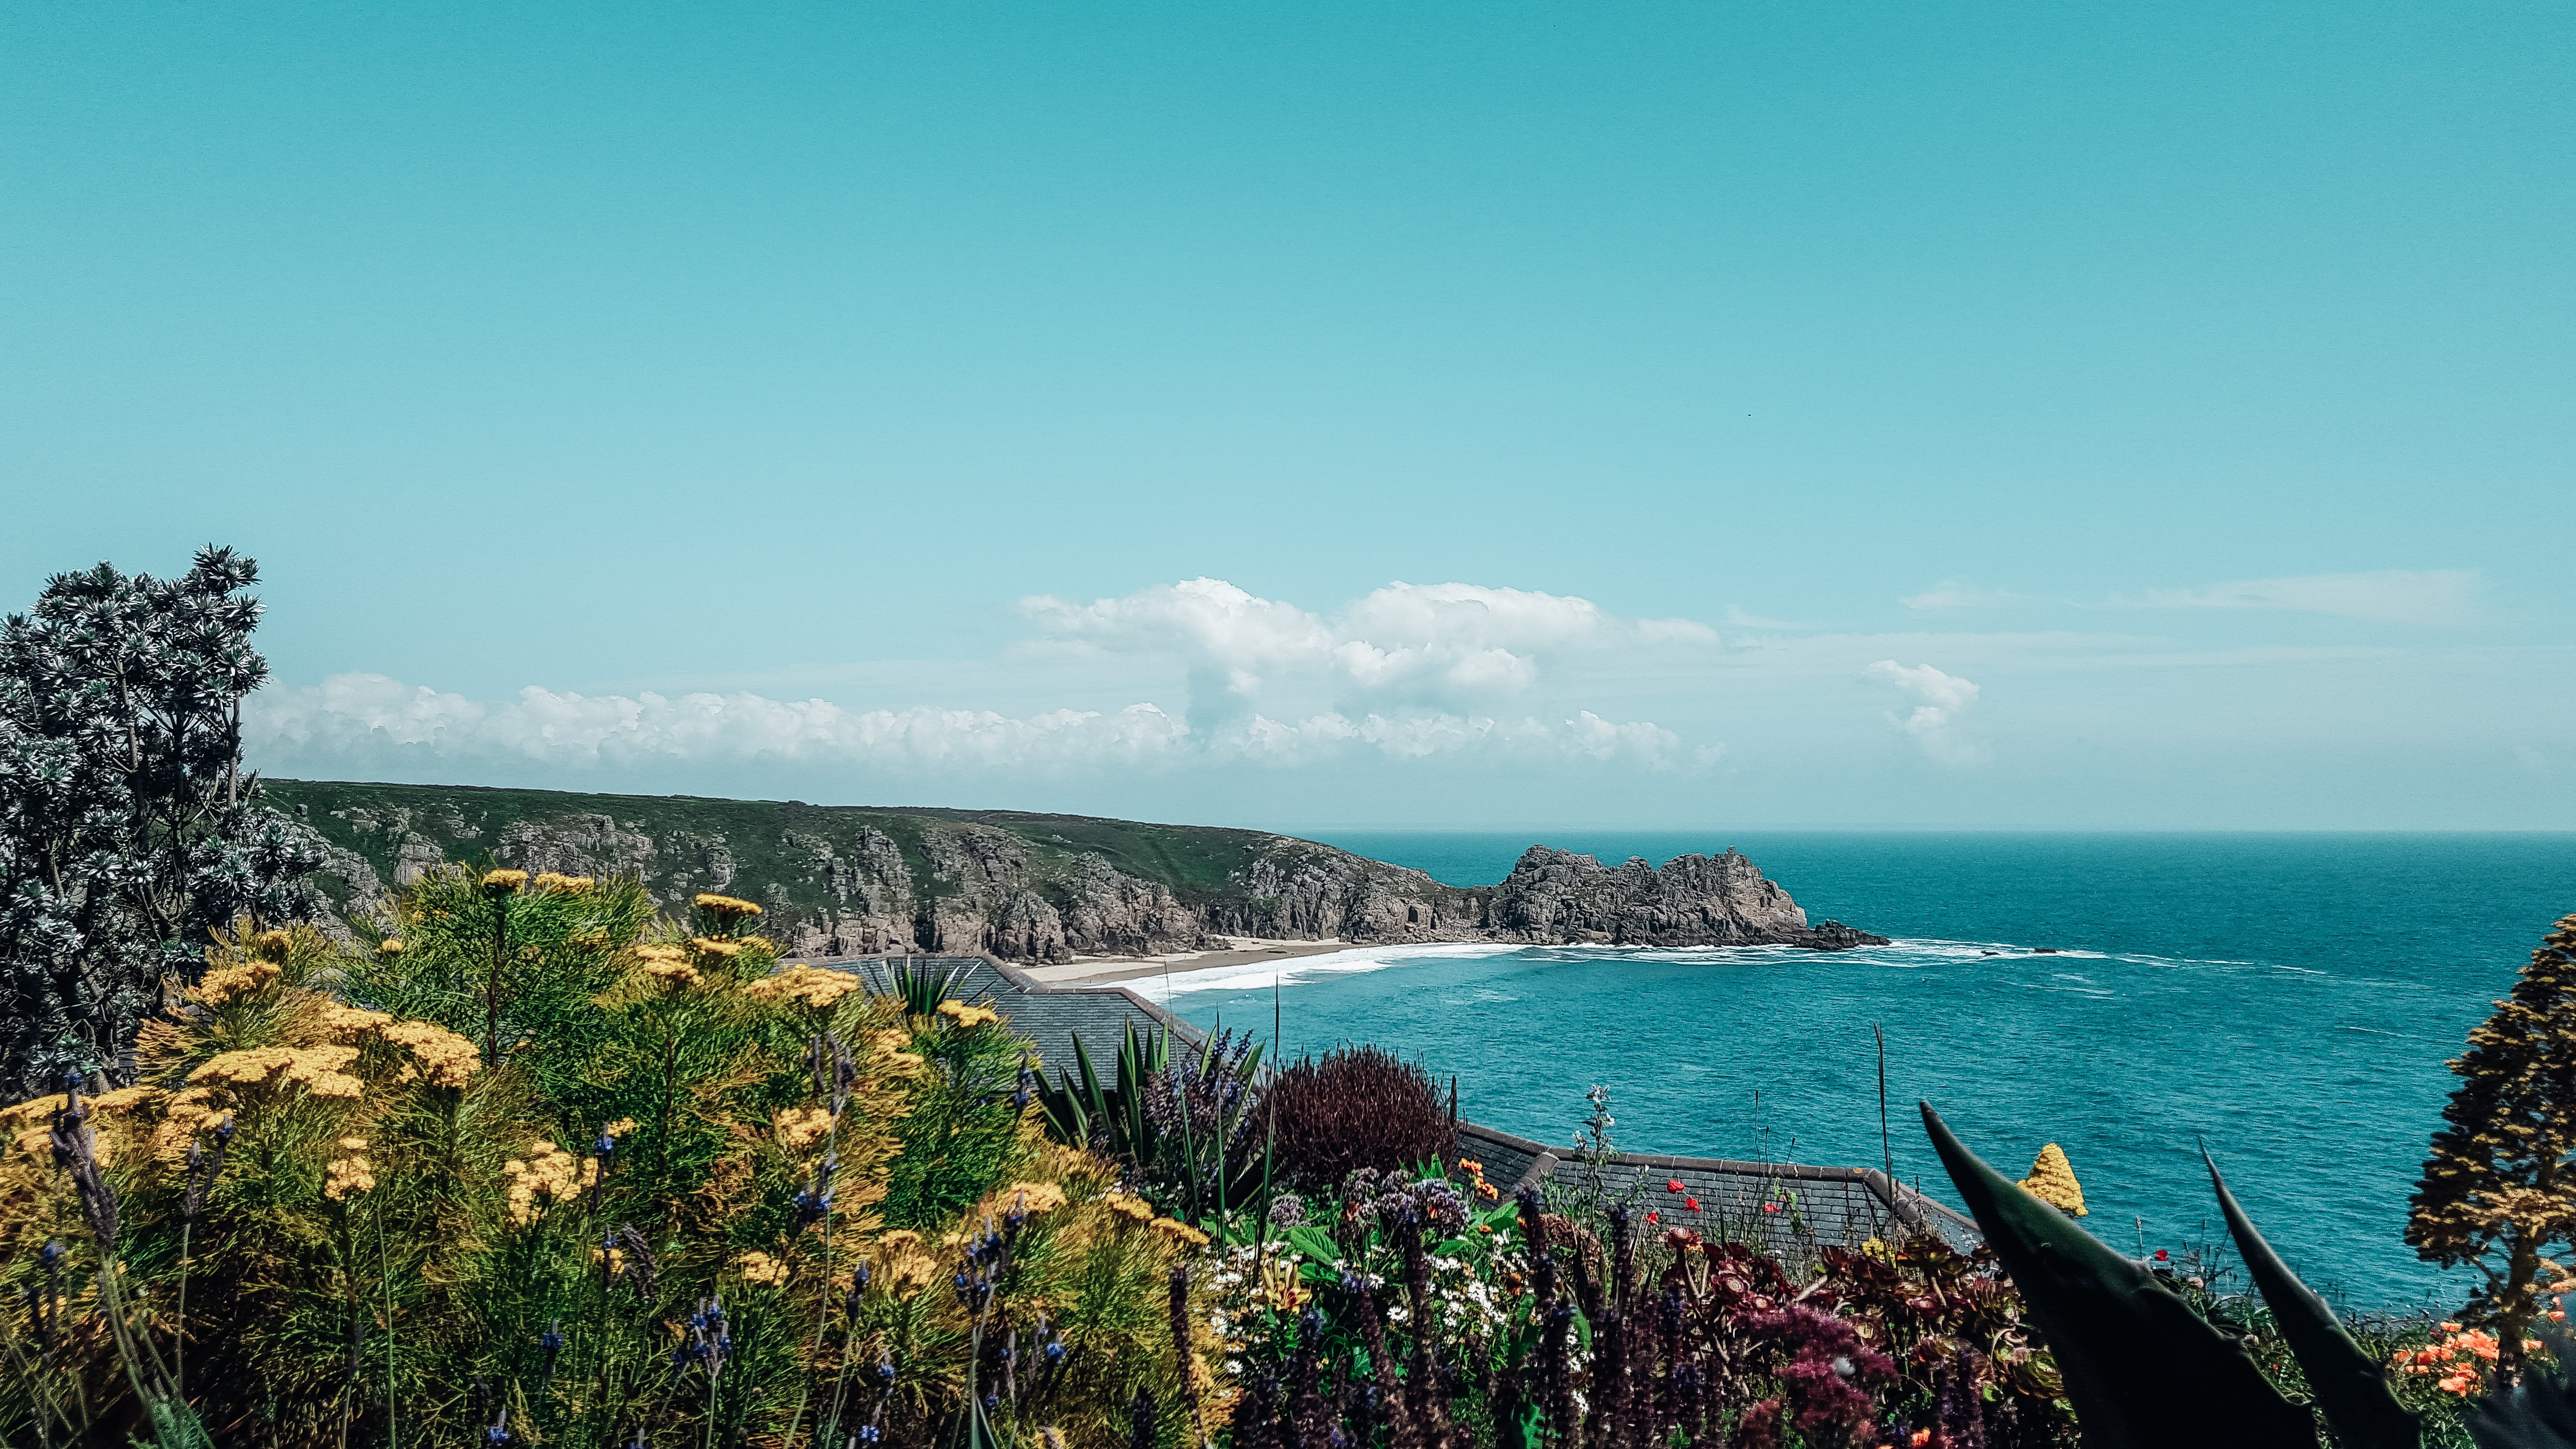 A Quick Guide To Minack Theatre and Porthcurno Beach - The stunning views from Minack Theatre out over Porthcurno, Cornwall